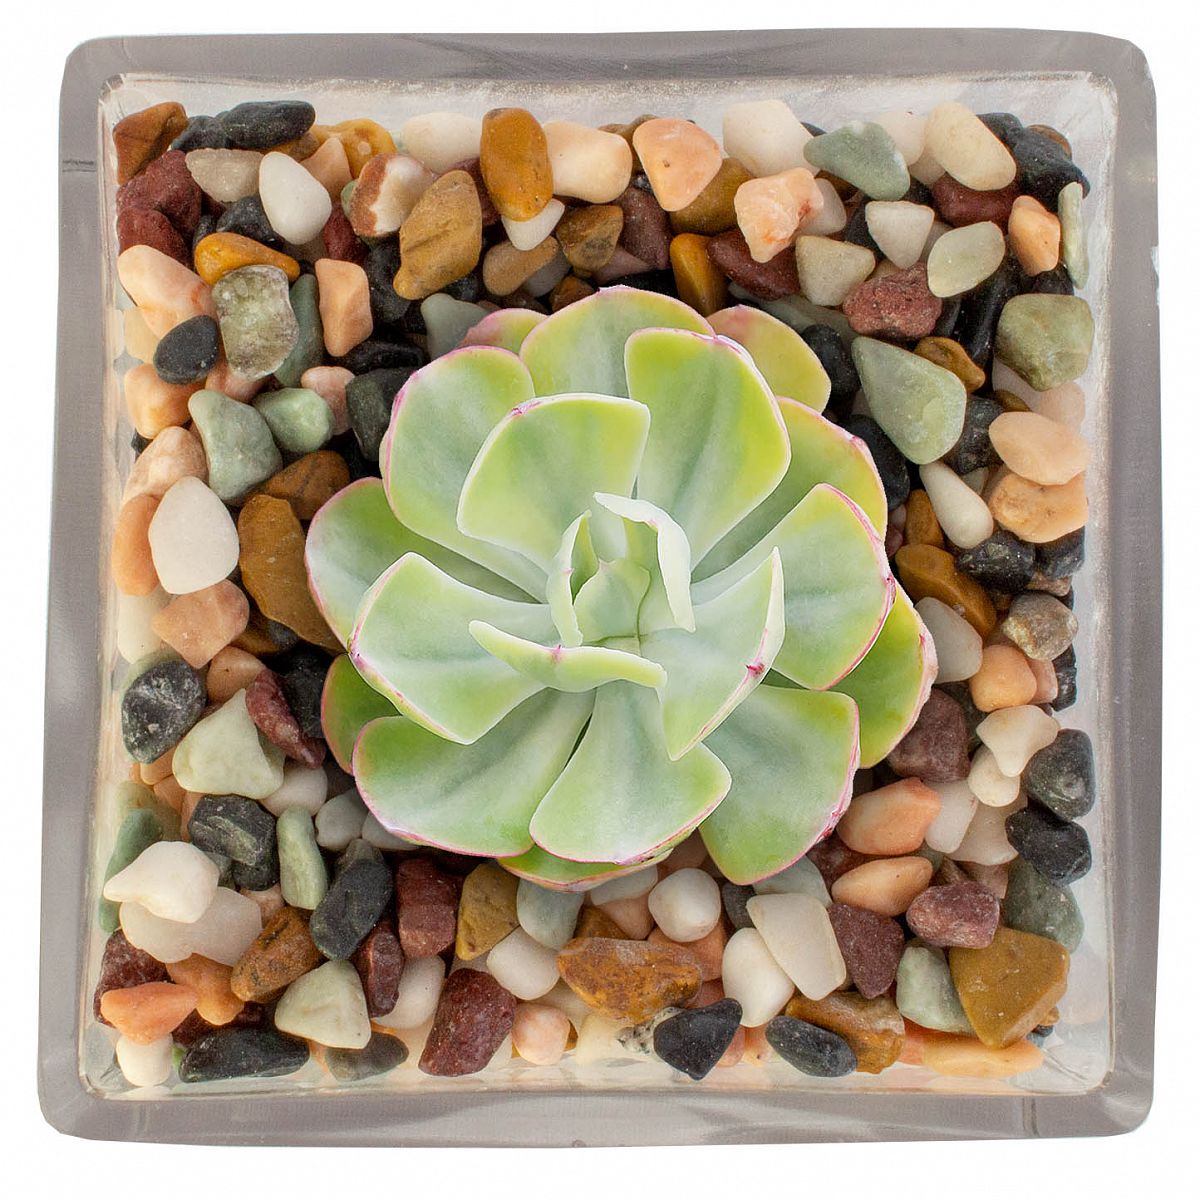 Plant Pot Toppers Stones Mixed River Rocks